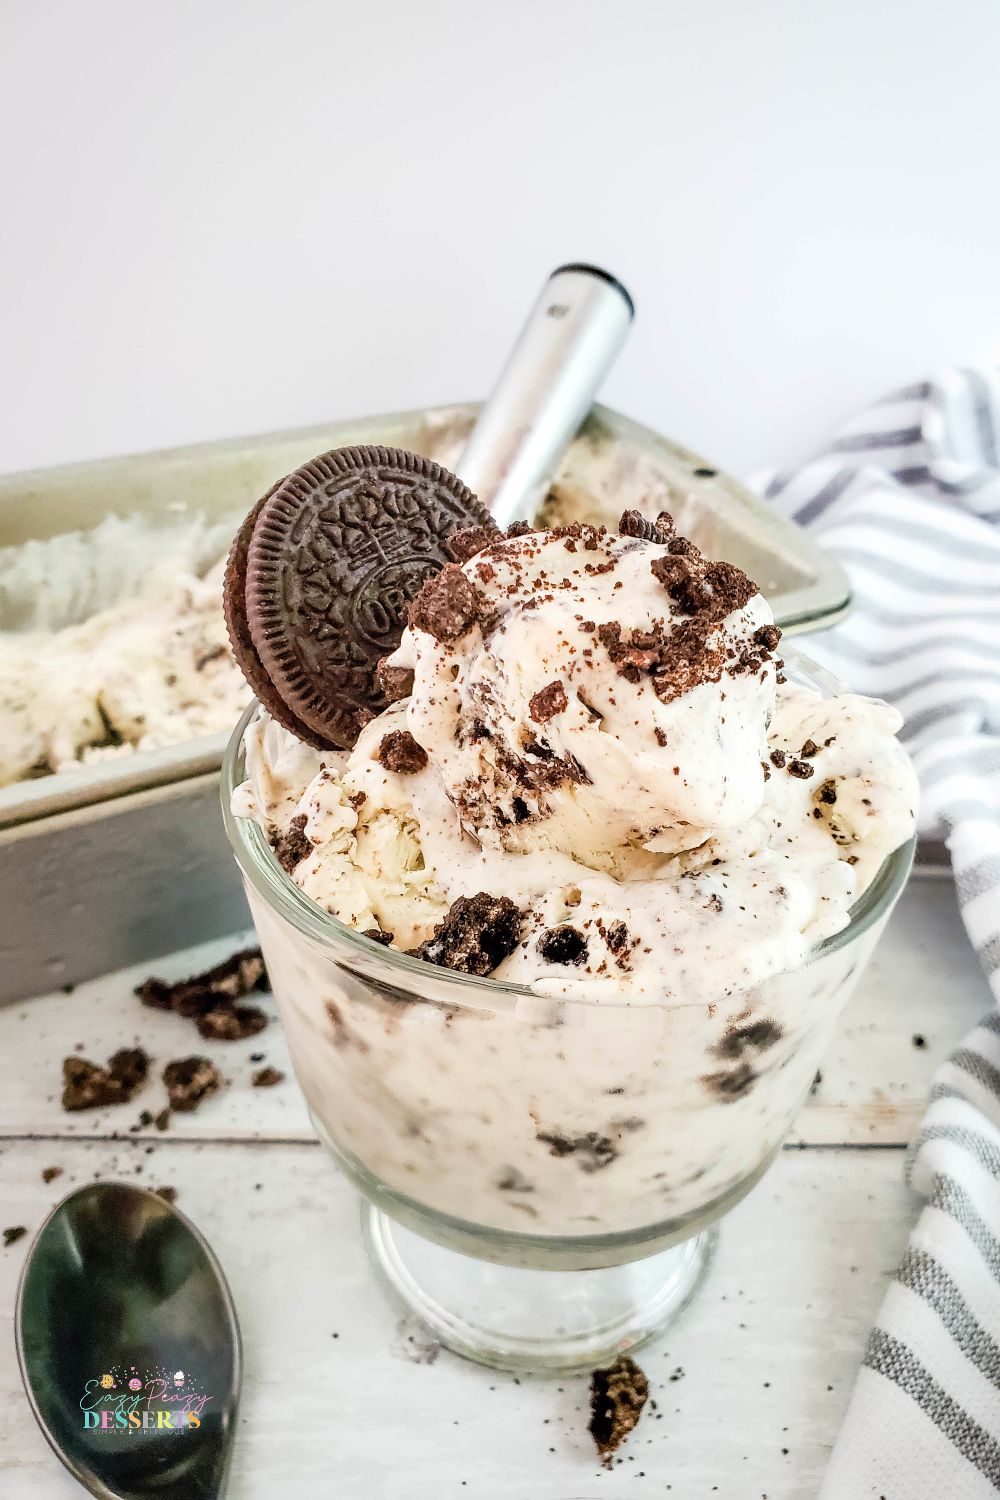 Angle photo shot of homemade cookies and cream ice cream in an ice cream cup